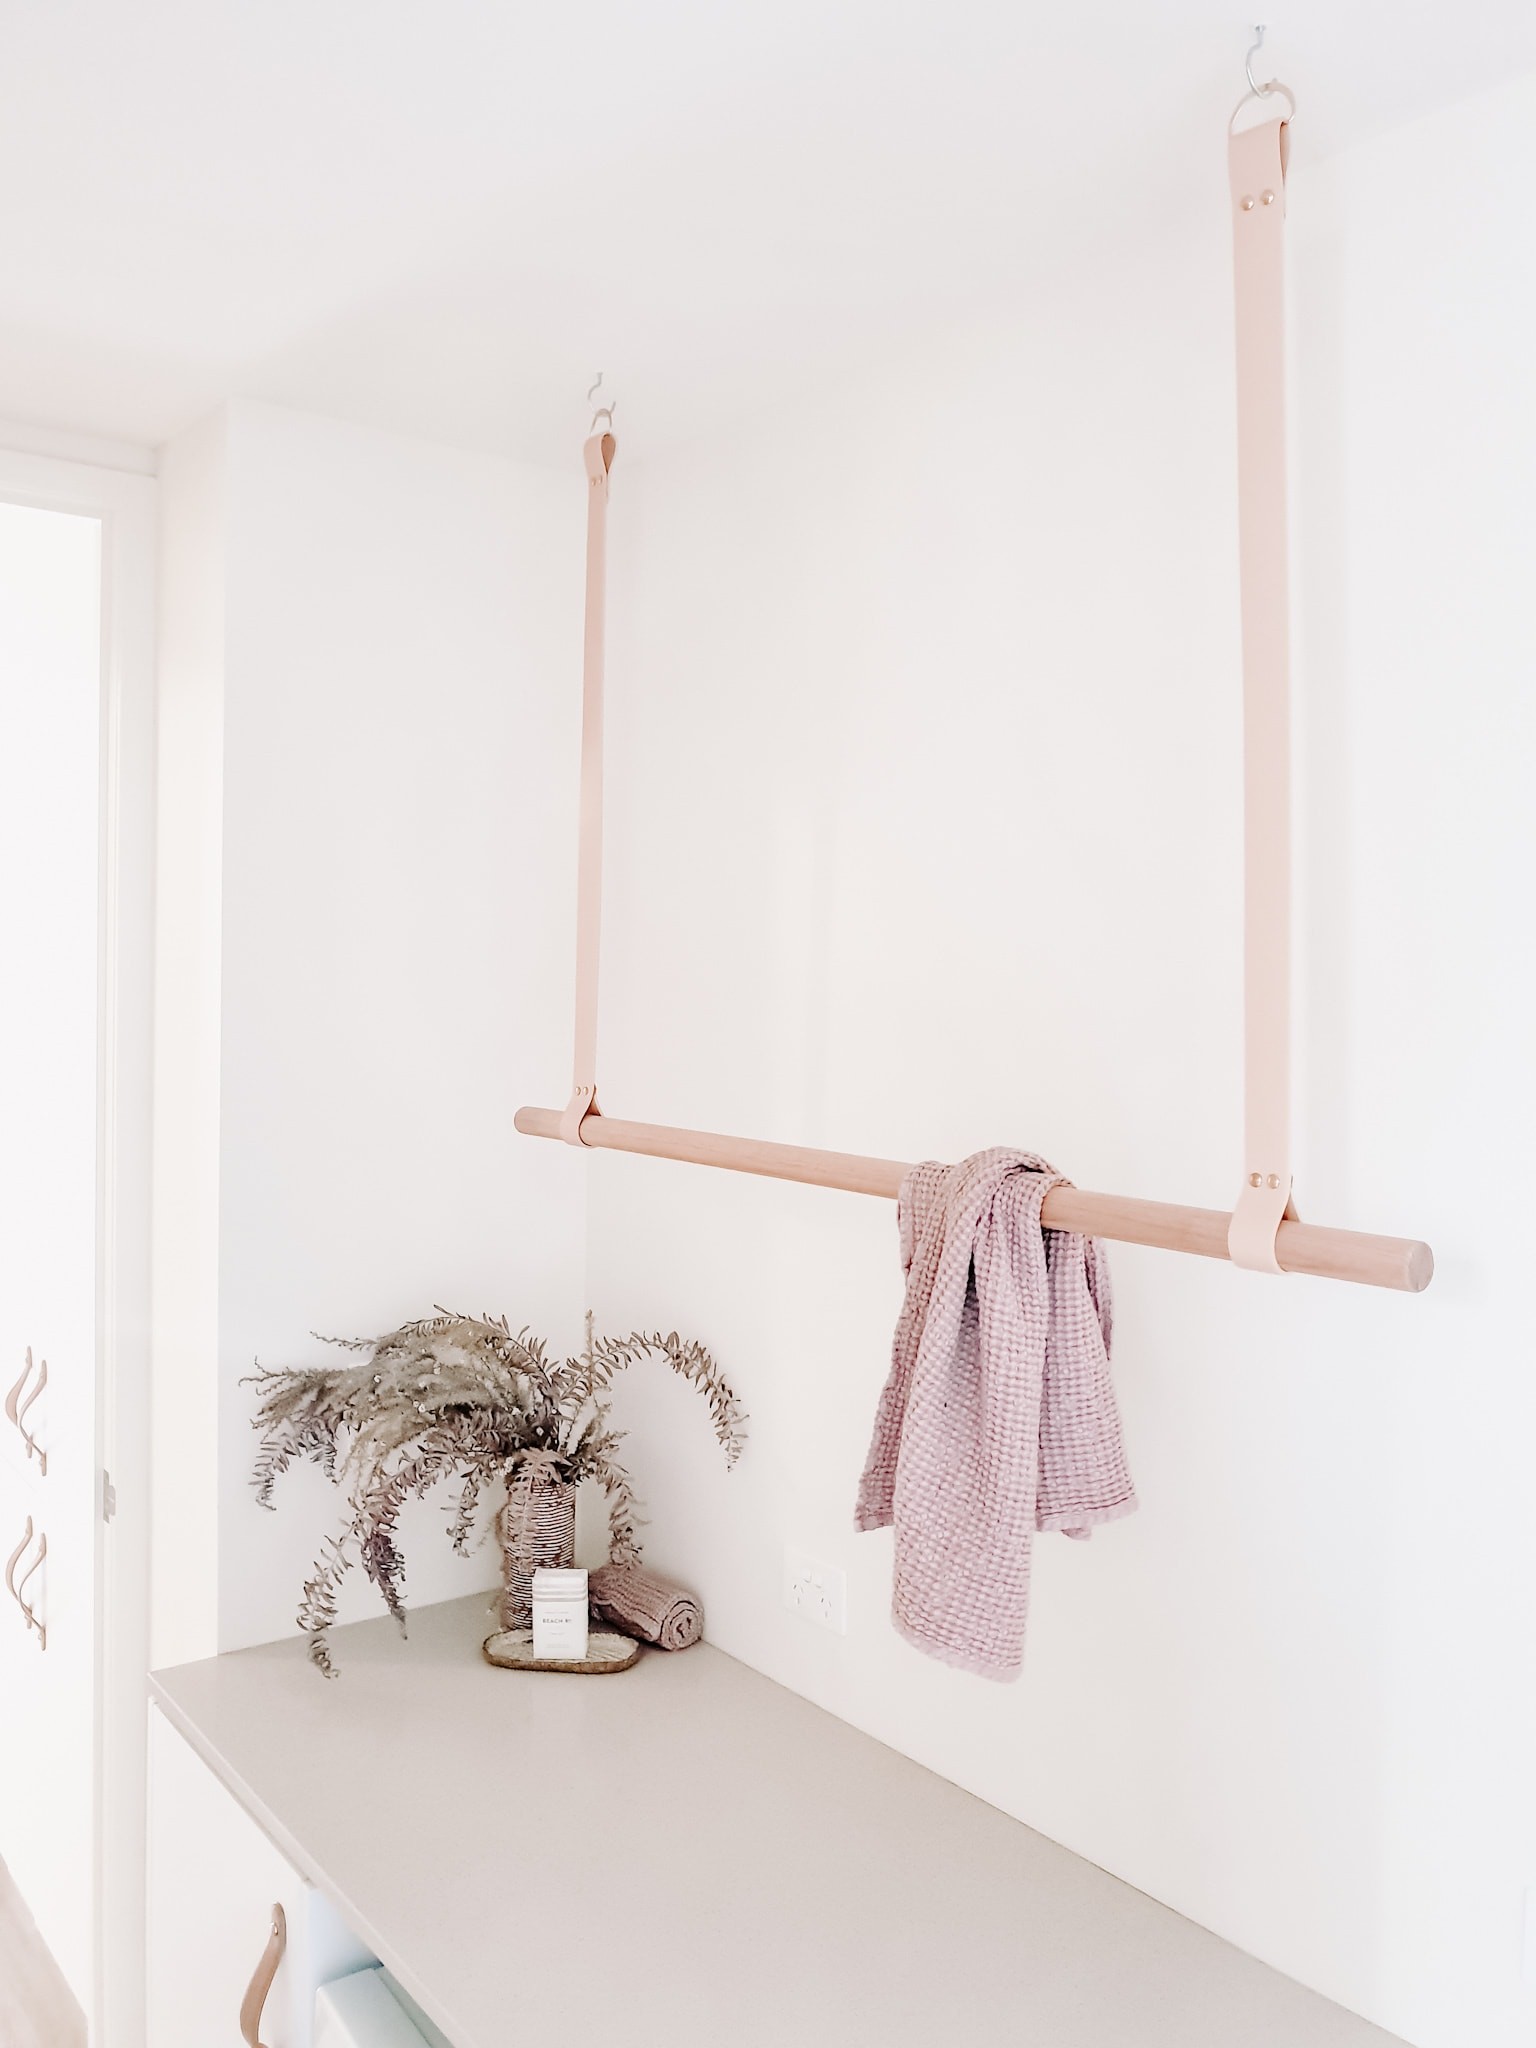 leather strap clothes drying hanger for laundry room